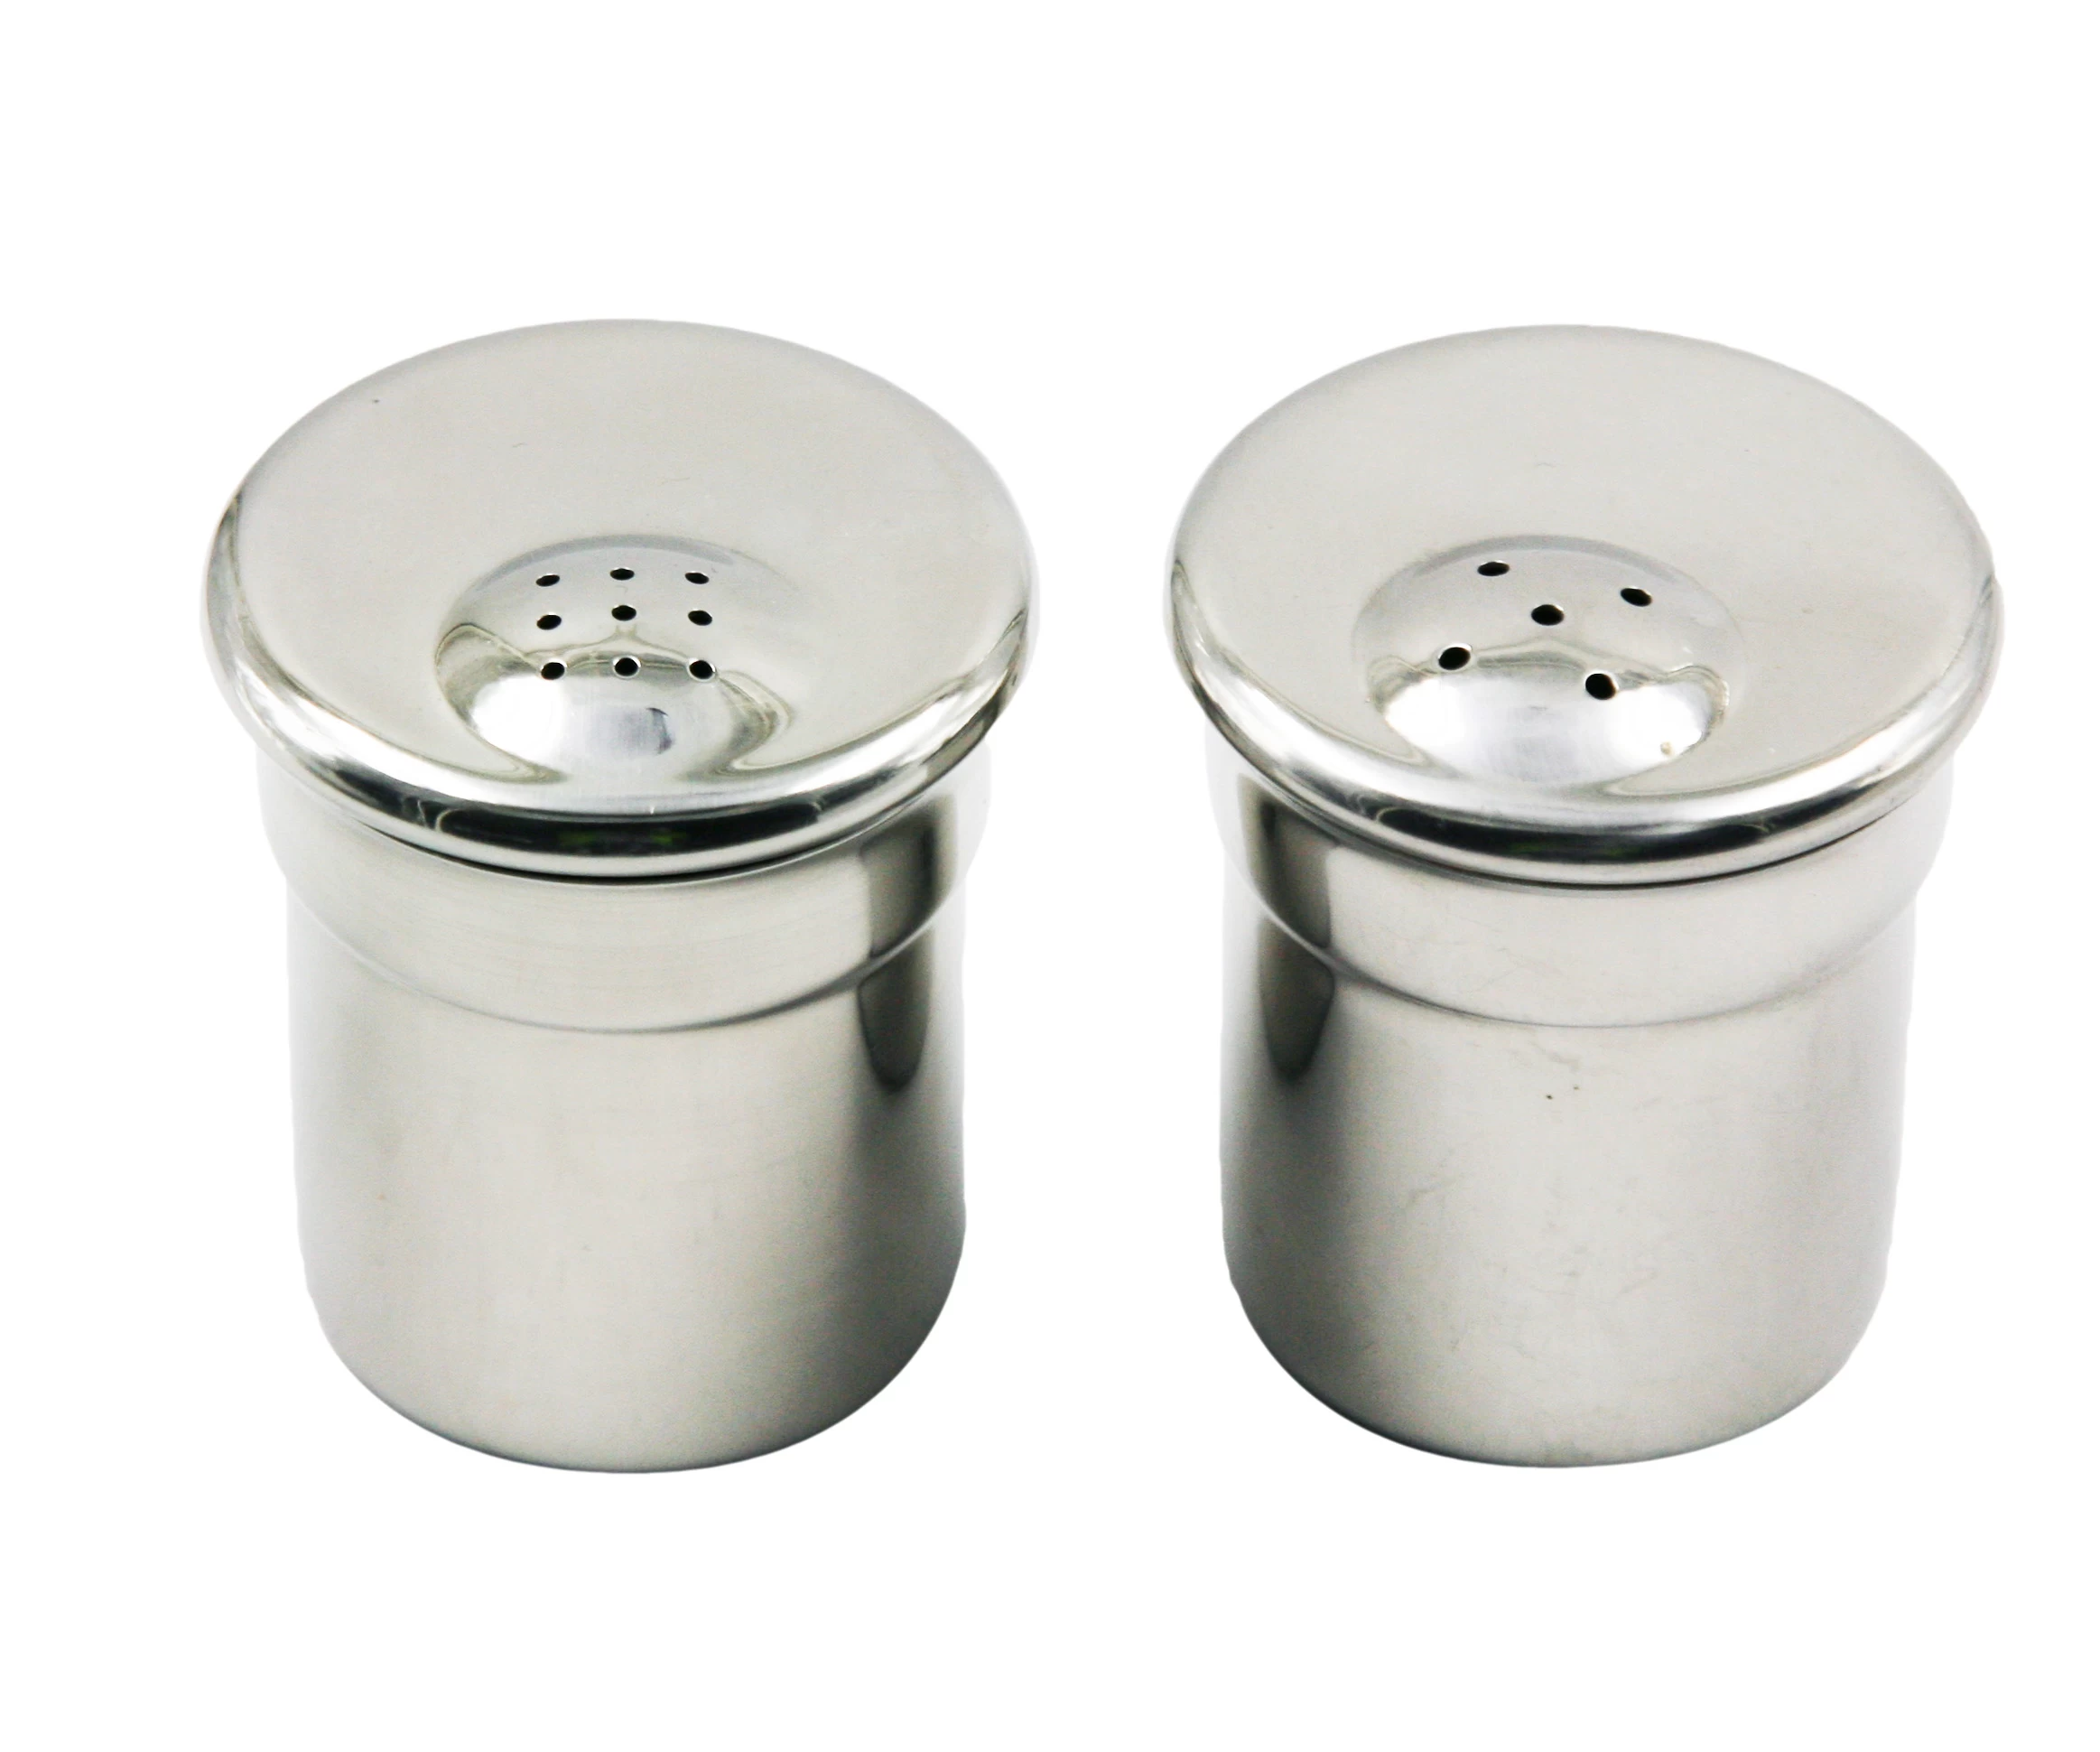 Practical Stainless steel 2pcs salt and pepper shakers EB-SP93